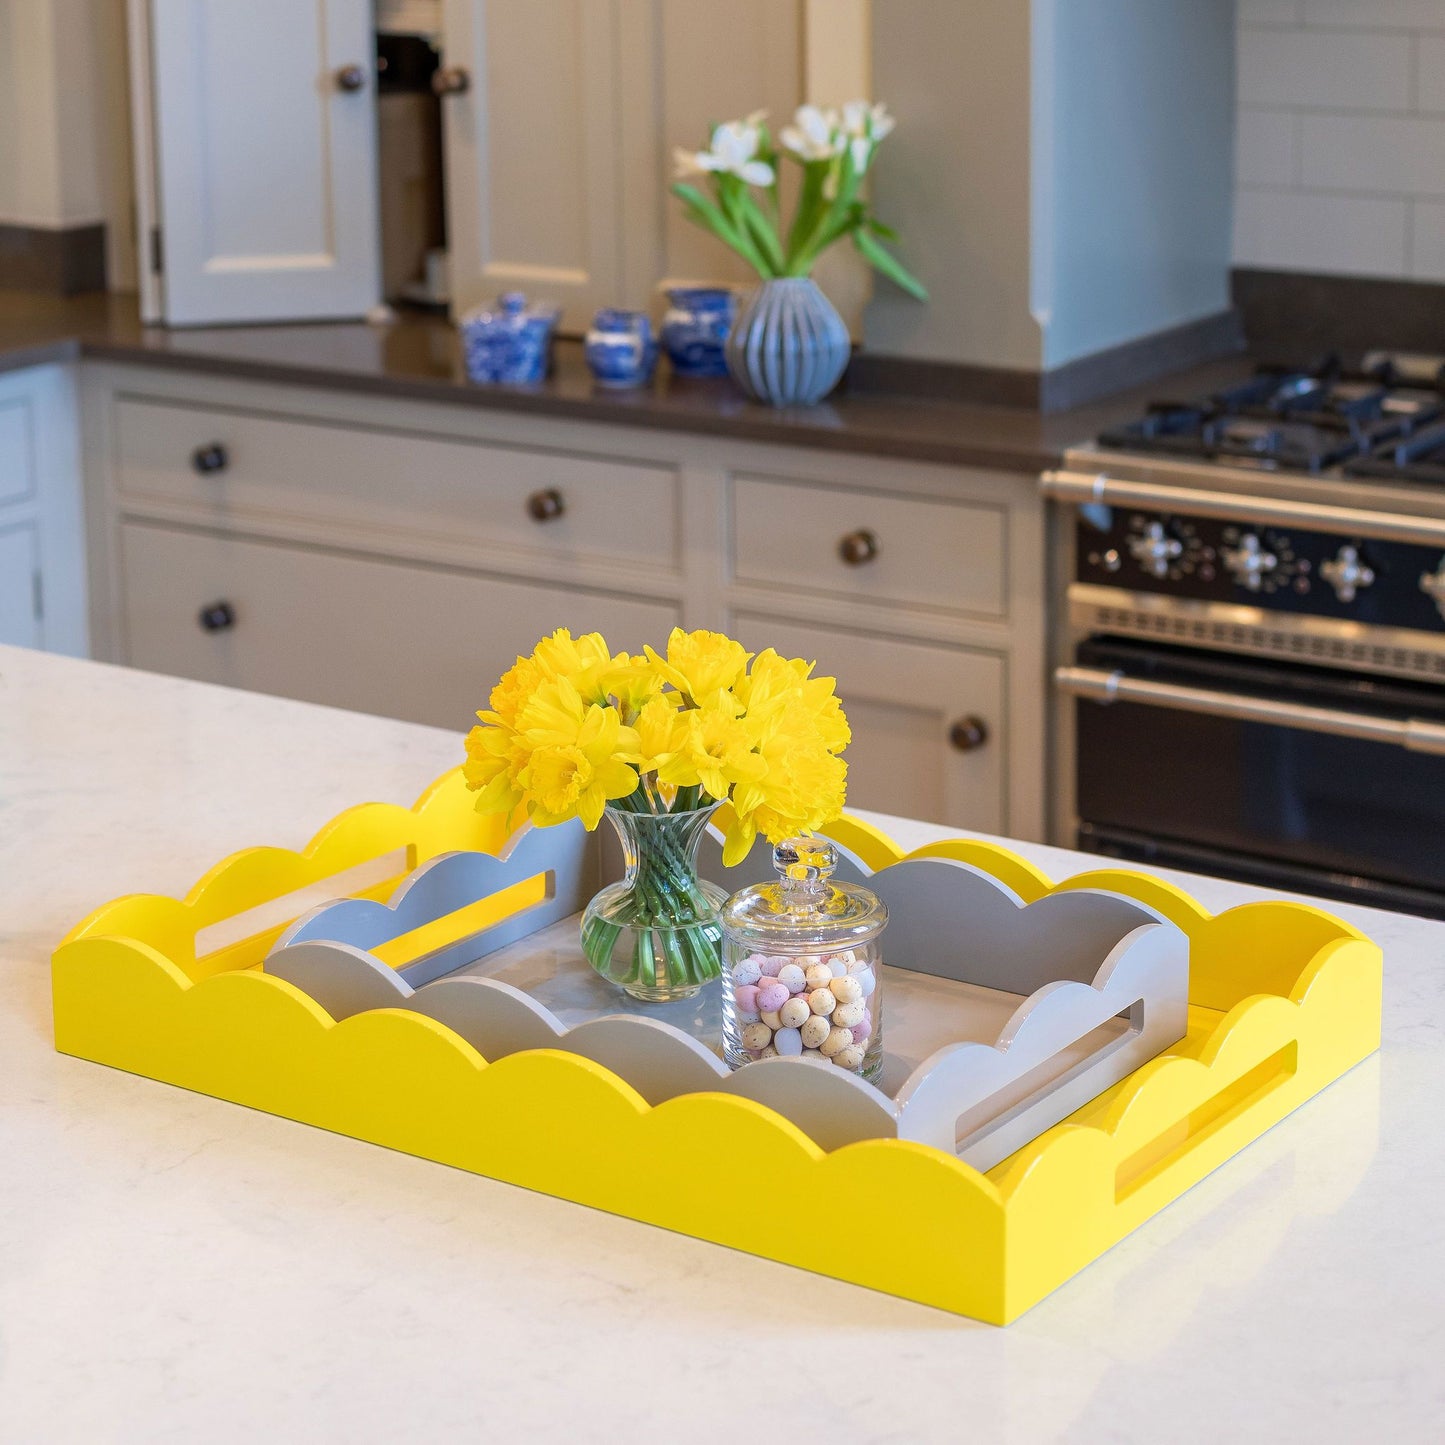 Large, yellow lacquer tray and a chiffon gray serving tray